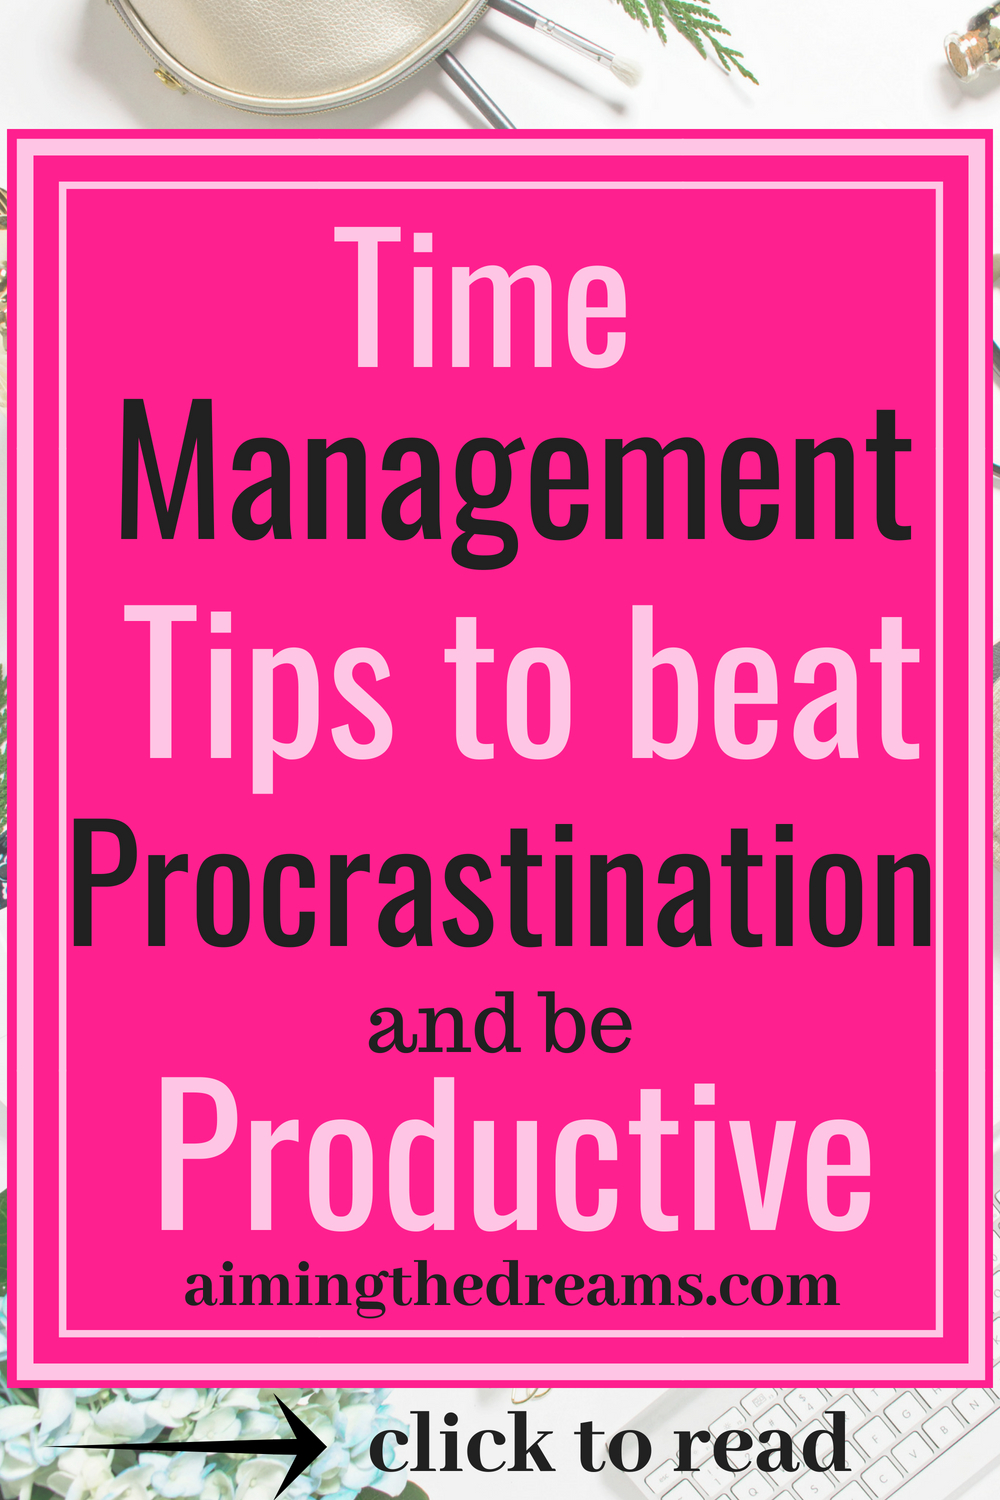 Time management strategies to beat procrastination and be productive. click to read.